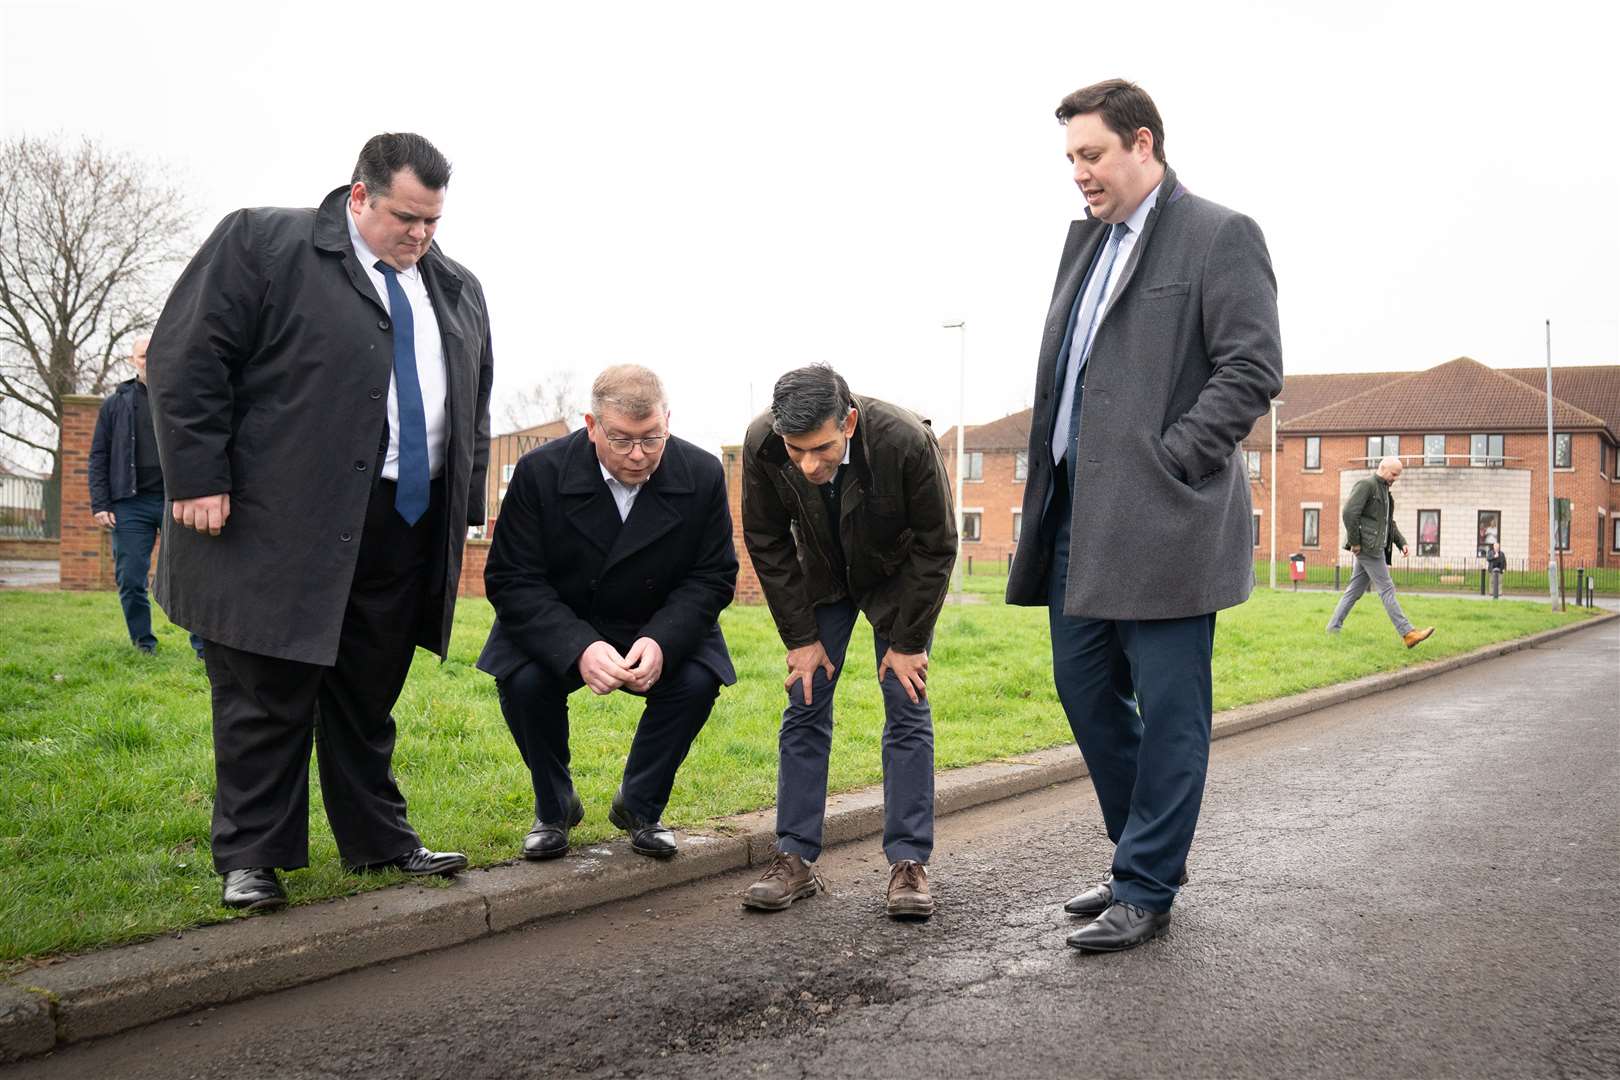 Prime Minister Rishi Sunak with Darlington Council leader Jonathan Dulston, far left, Tees Valley mayor Ben Houchen, far right, and Darlington MP Peter Gibson, second from left, in Firth Moor during a visit to Darlington, County Durham (Stefan Rousseau/PA)